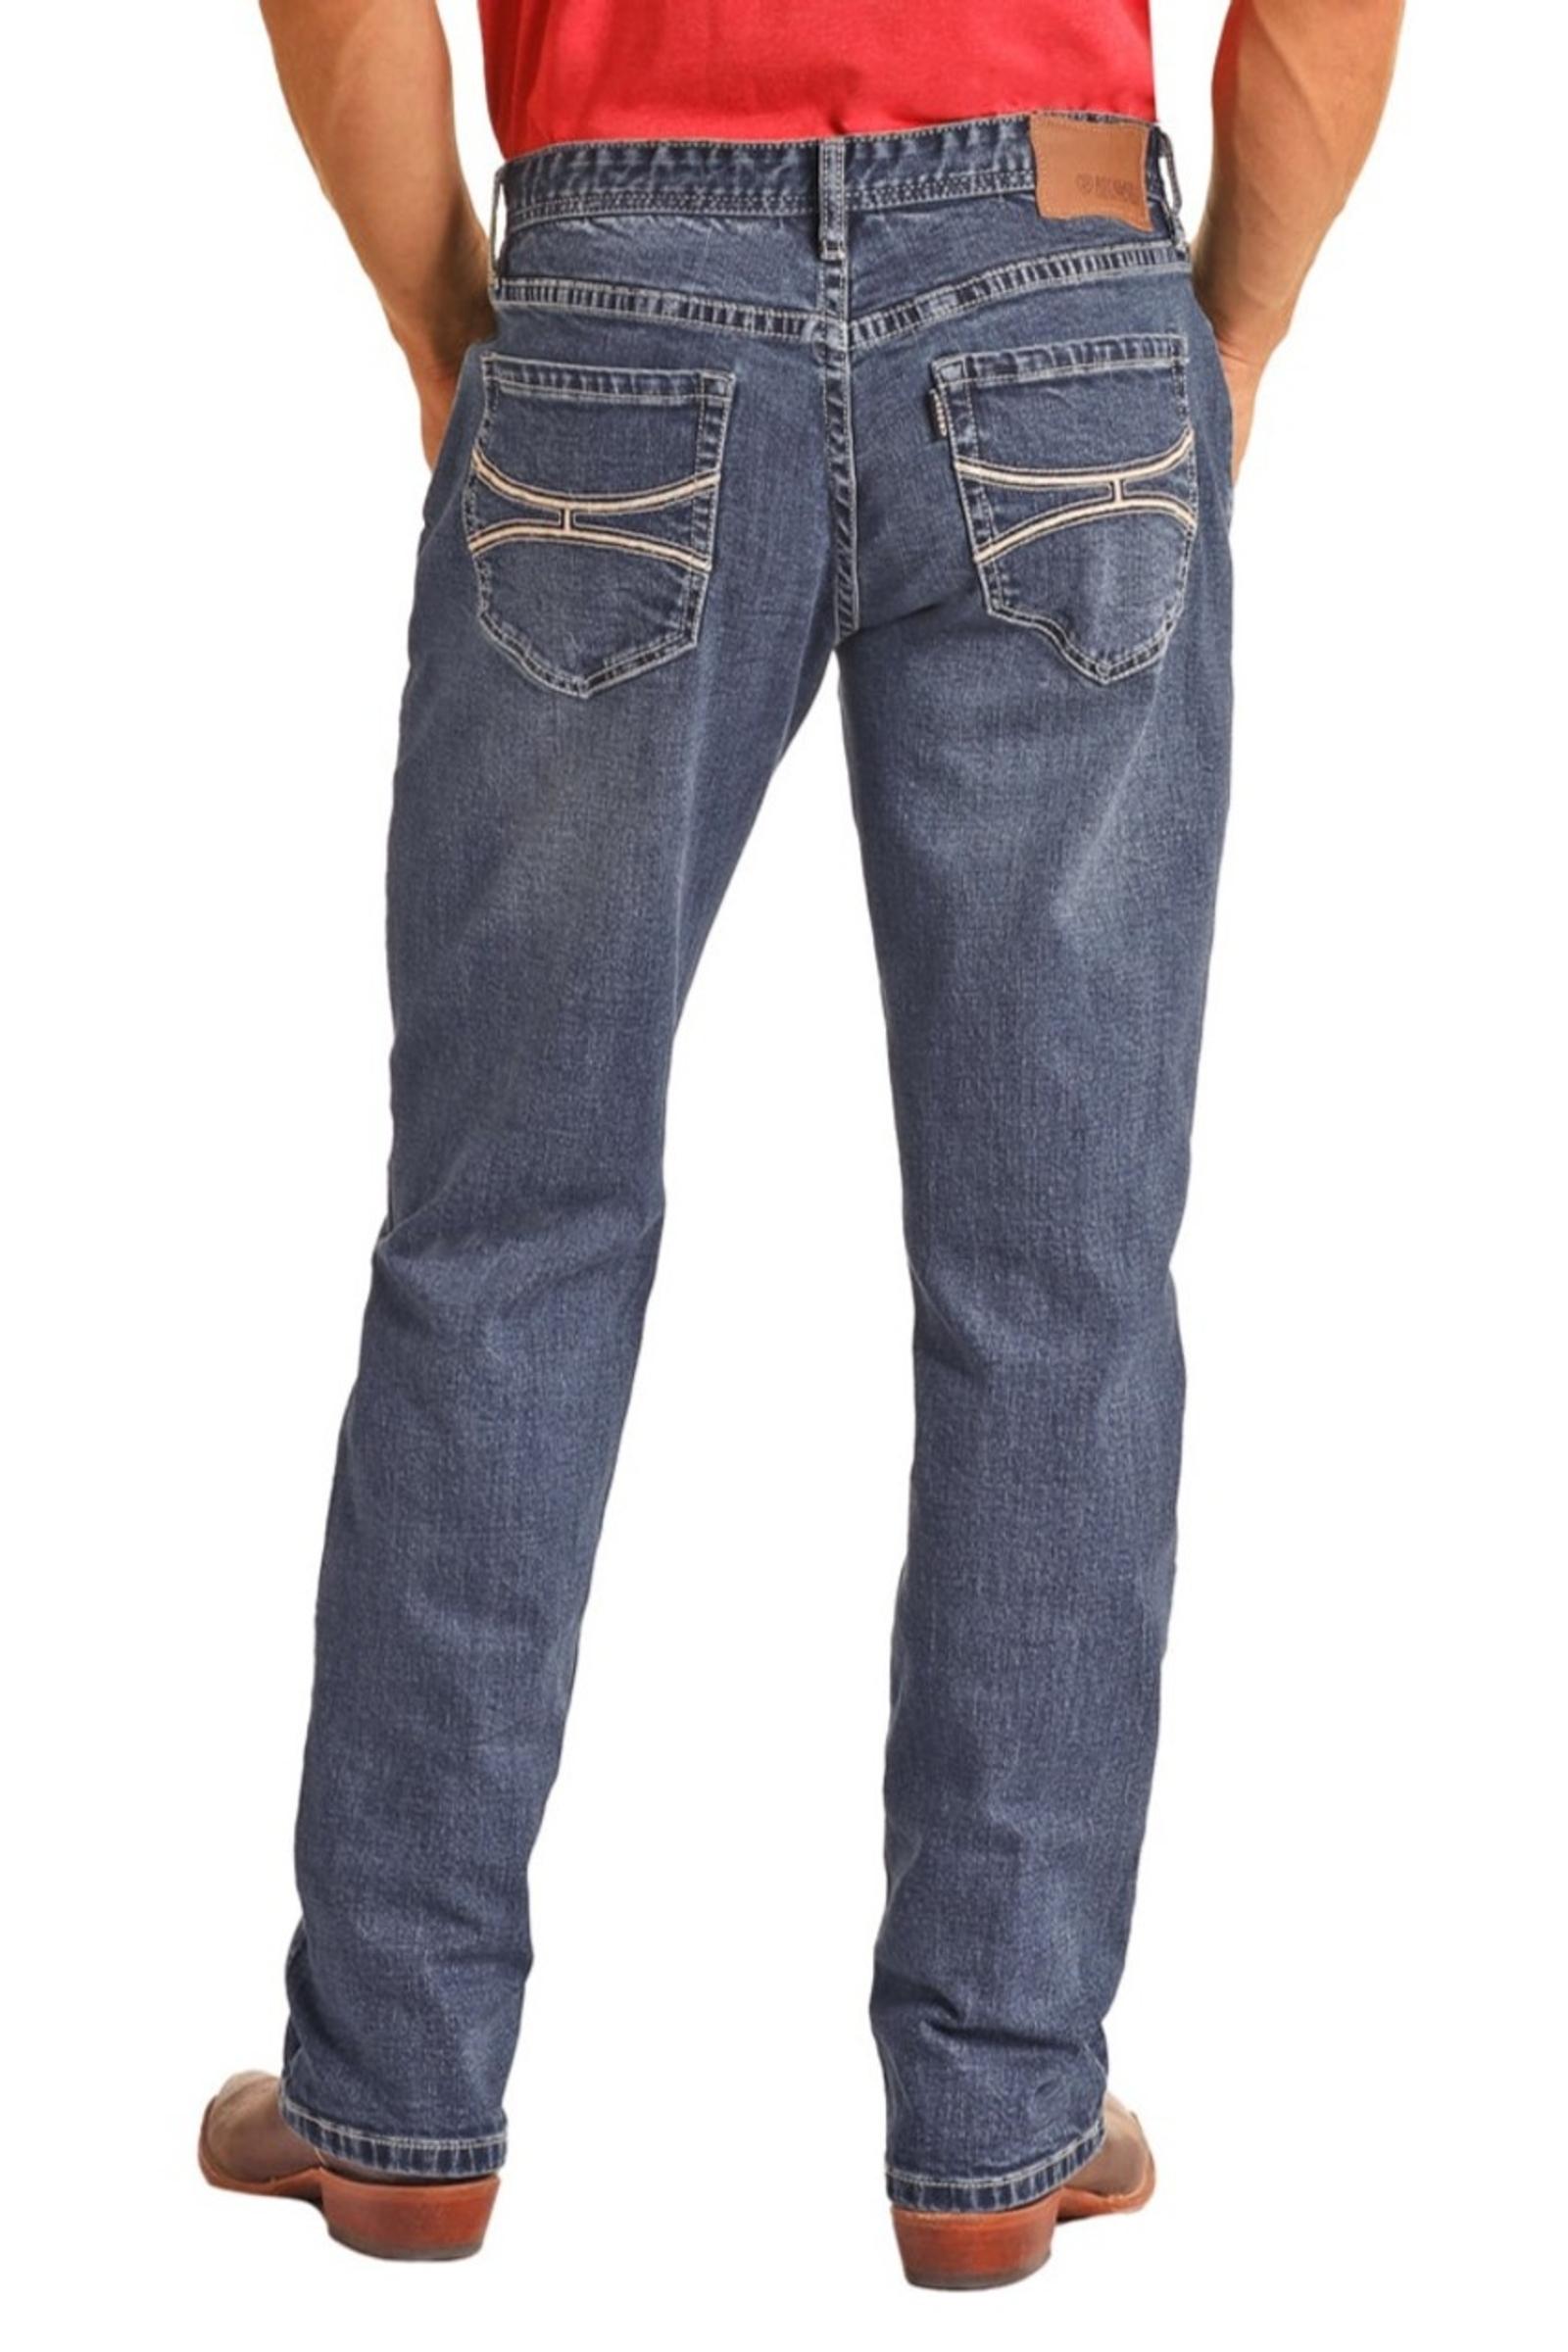 Rock and Roll Denim Men's Hooey Relaxed Tapered Stretch Stackable Bootcut Jeans back